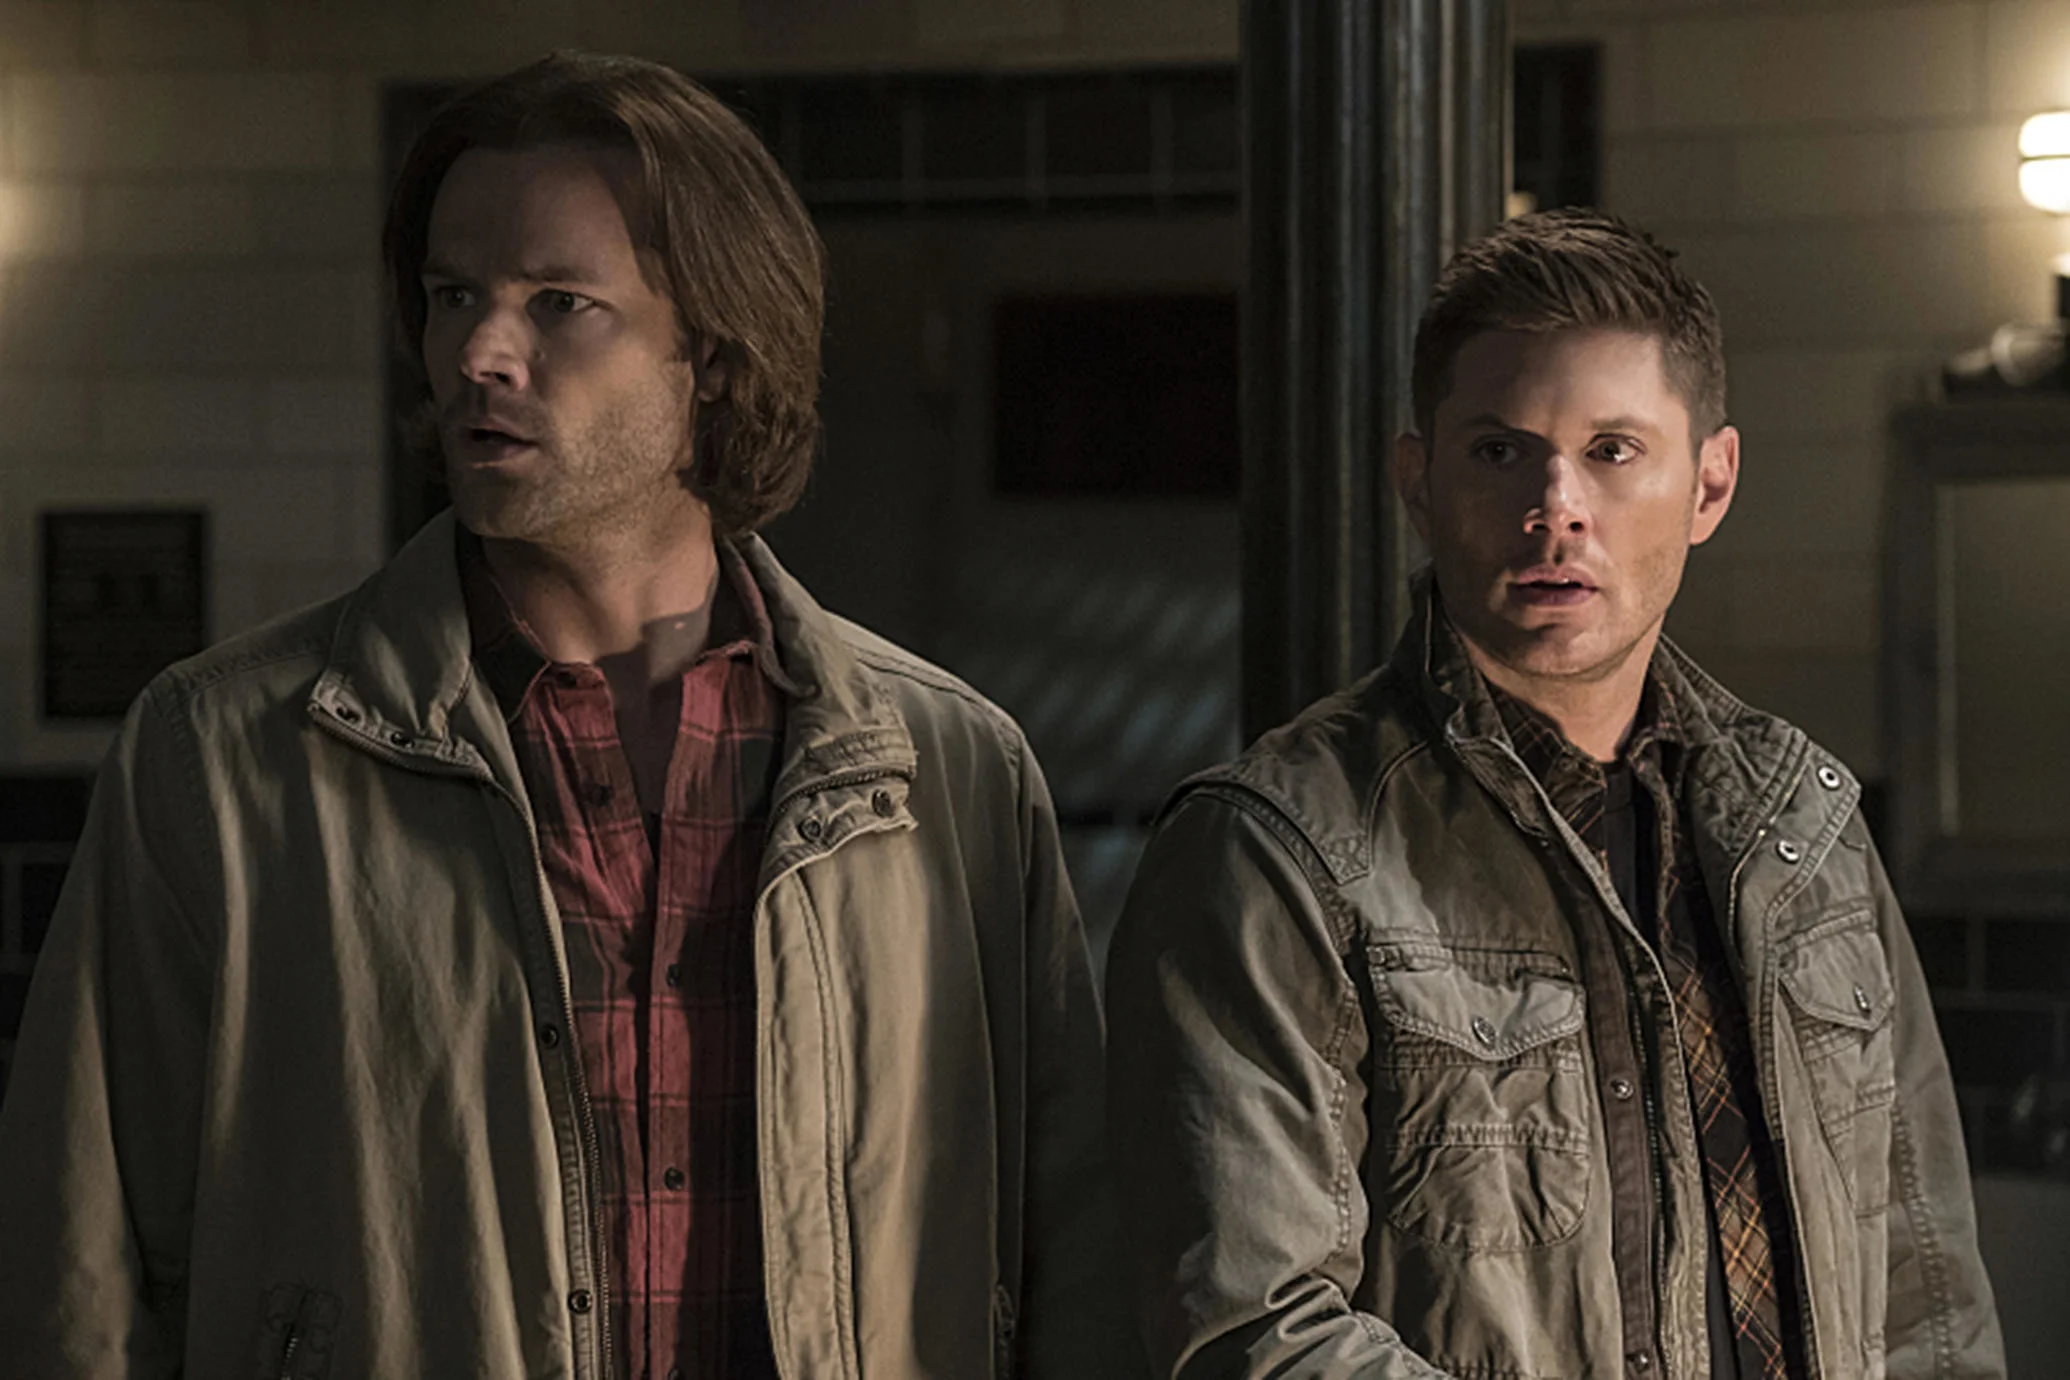 Protagonists are Sam and Dean Winchester. Supernatural is one of the biggest fantasy shows ever created. Check out some amazing Supernatural wallpapers